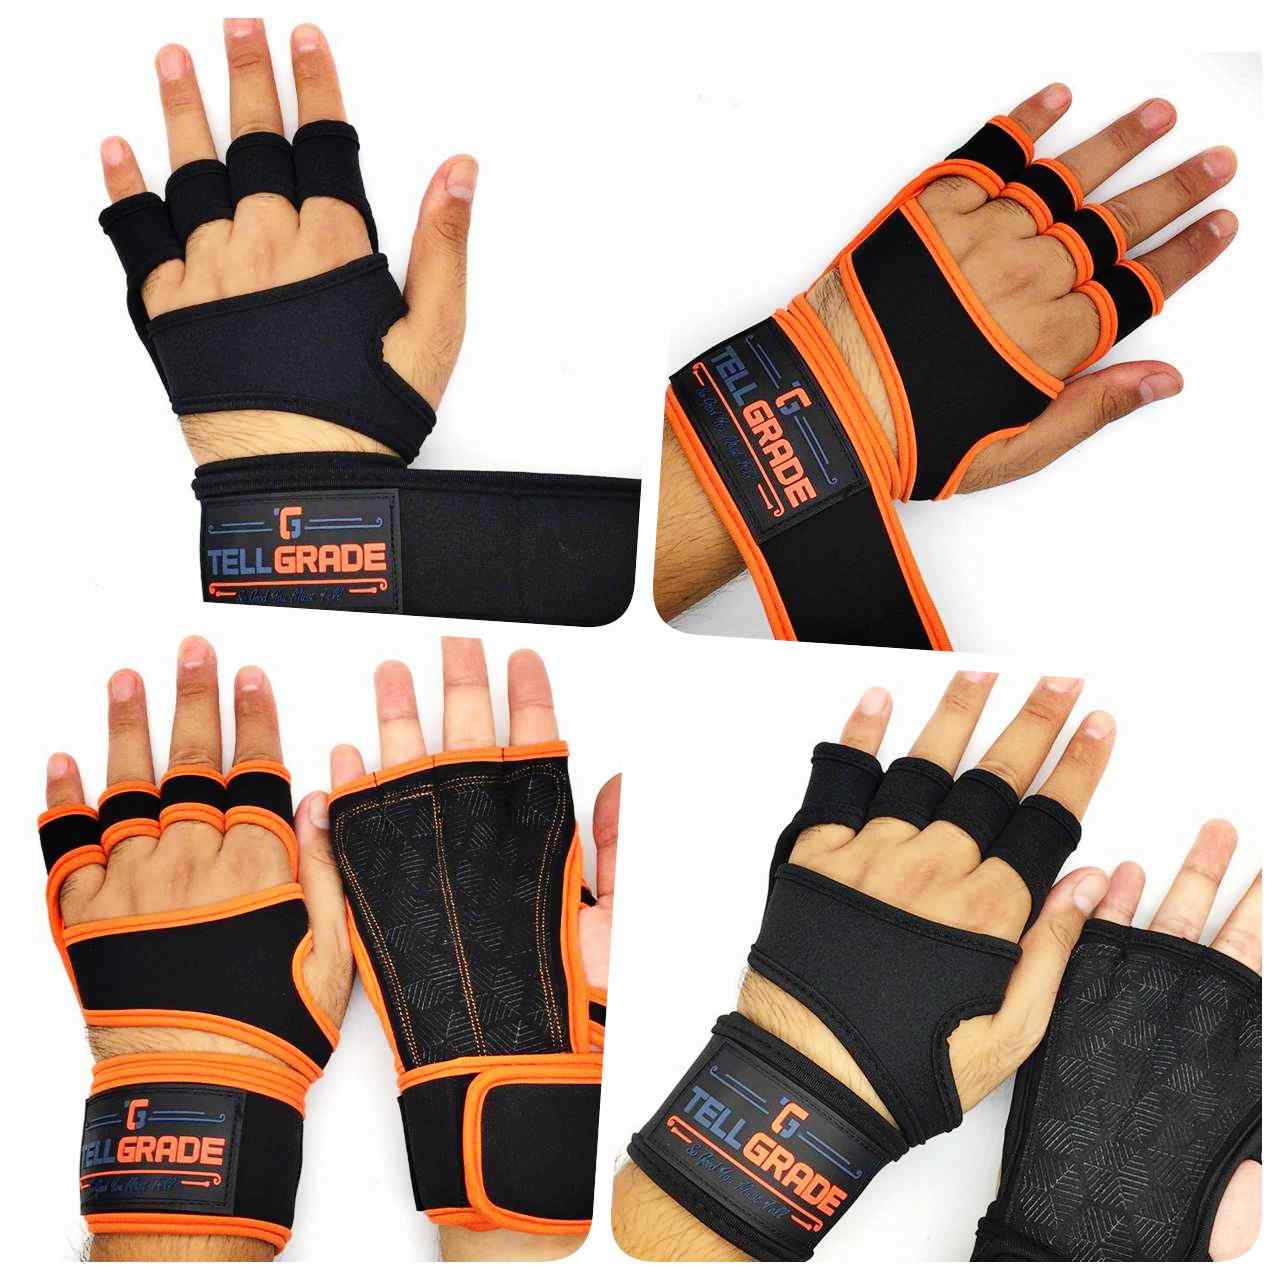 tellgrade ventilated workout gloves with wrist wraps, full palm protection & extra grip 1280x1280 collage pix 8ad